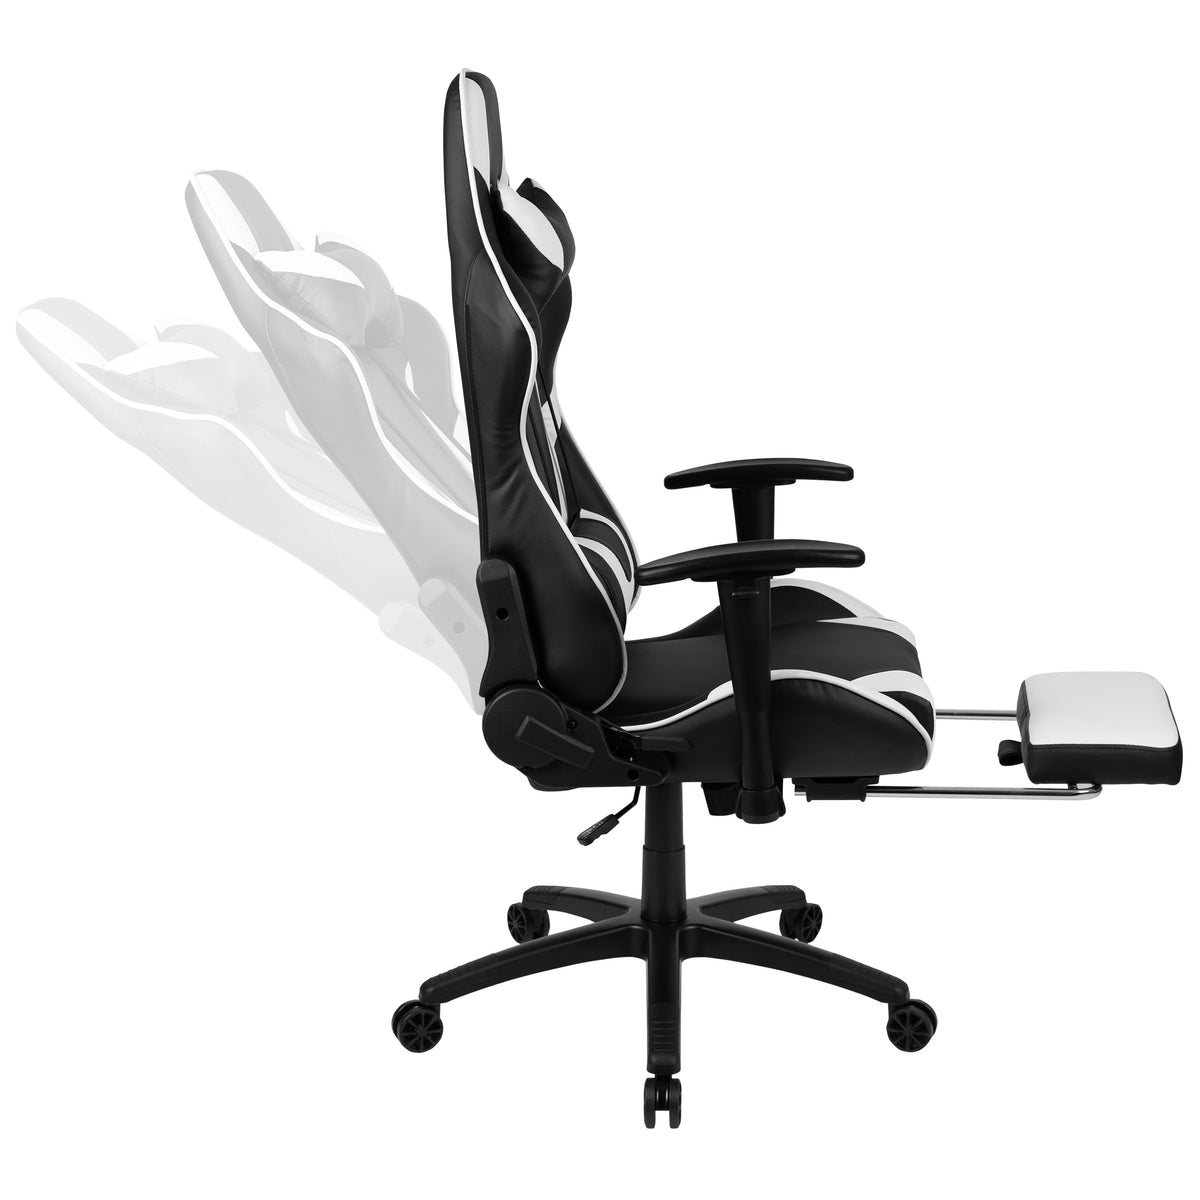 Black |#| Racing Gaming Ergonomic Chair with Reclining Back, Footrest in Black LeatherSoft